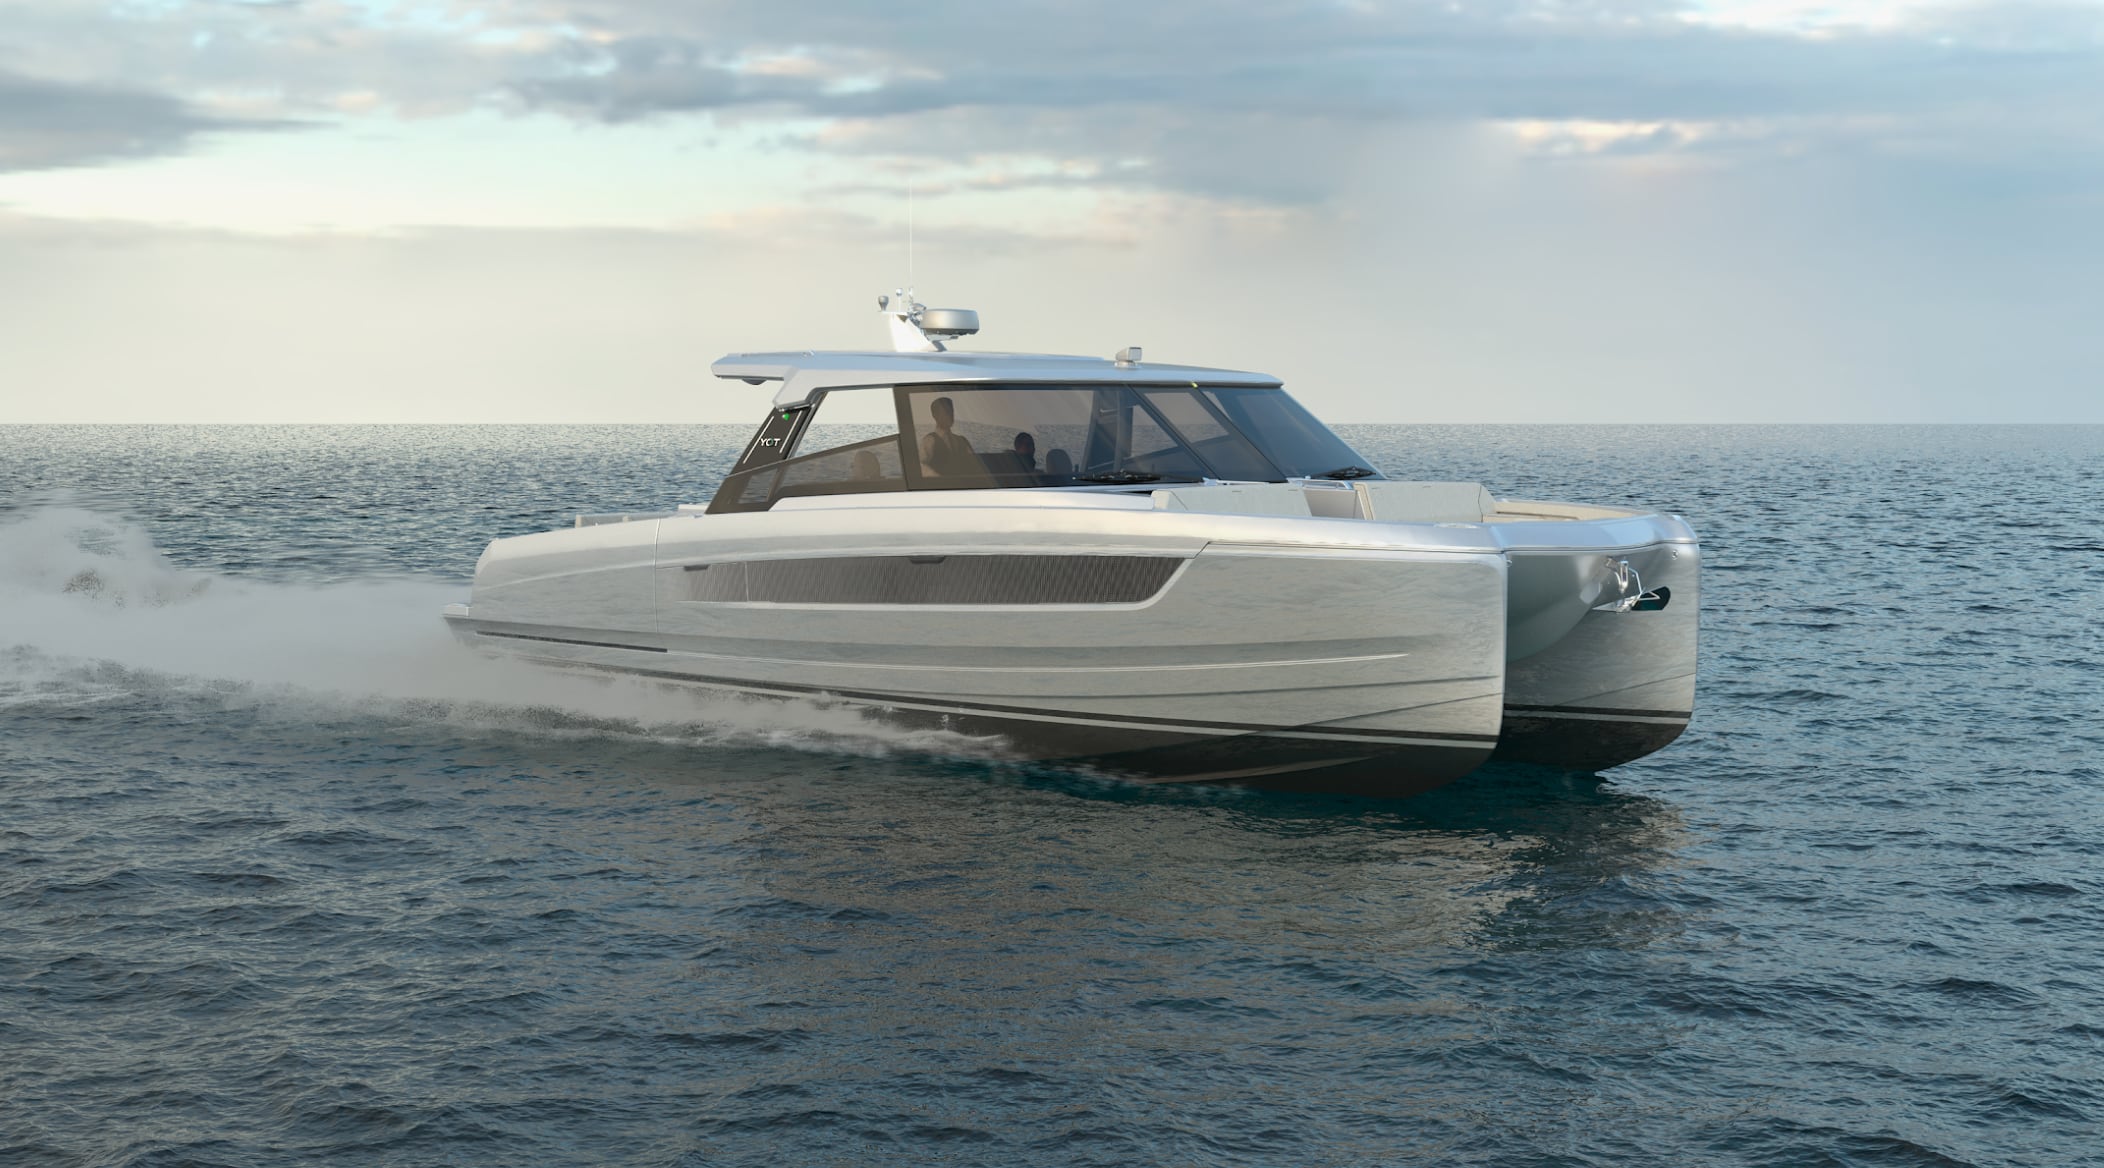 YOT POWER CATAMARANS PRESENTS THE YOT41 World-PREMIERE AT THE CANNES YACHTING FESTIVAL